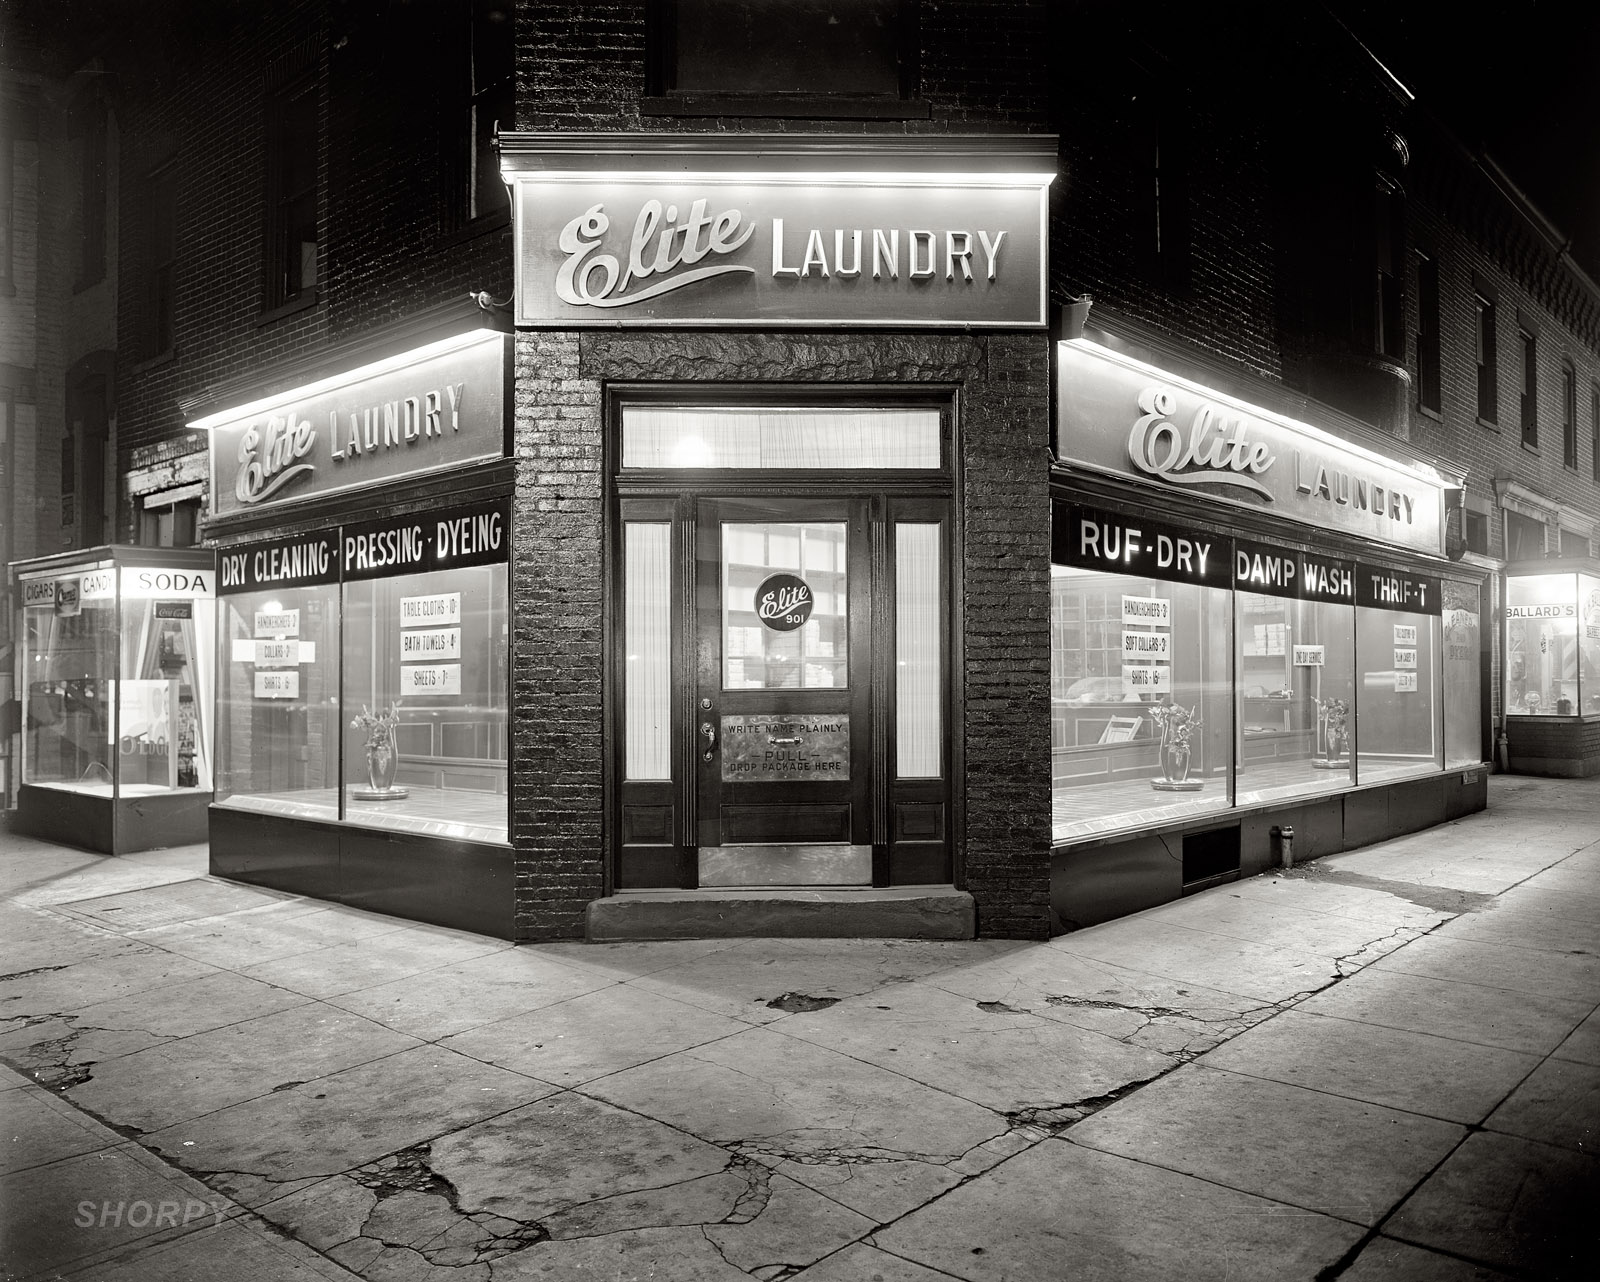 "Palace Laundry." The Elite Laundry in Washington circa 1924. View full size. National Photo Company Collection glass negative. The Elite today.